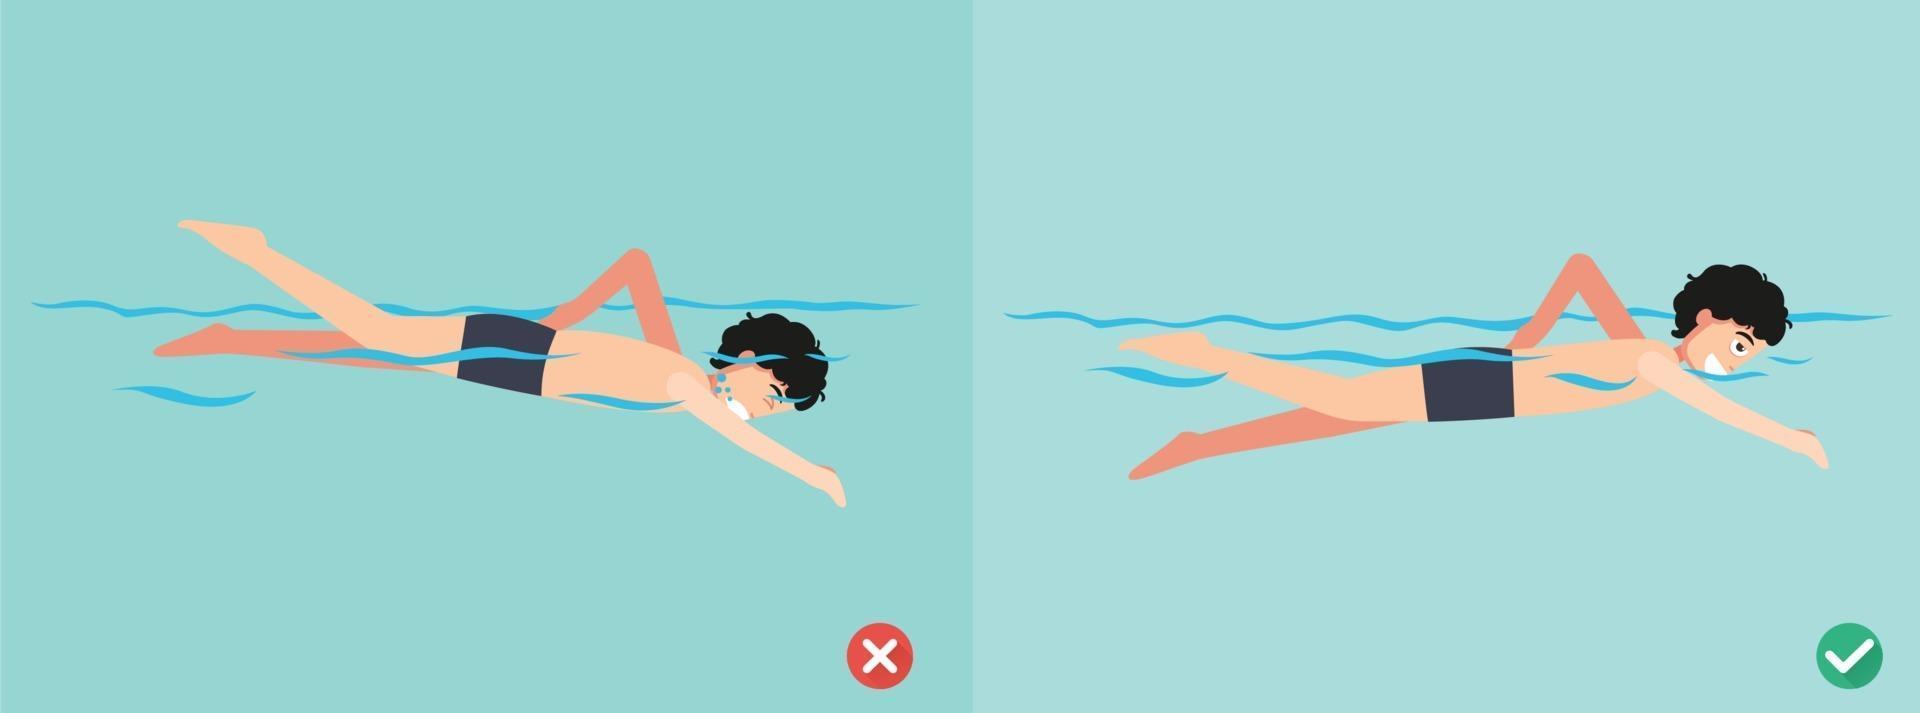 wrong and right ways for swimming, illustration vector